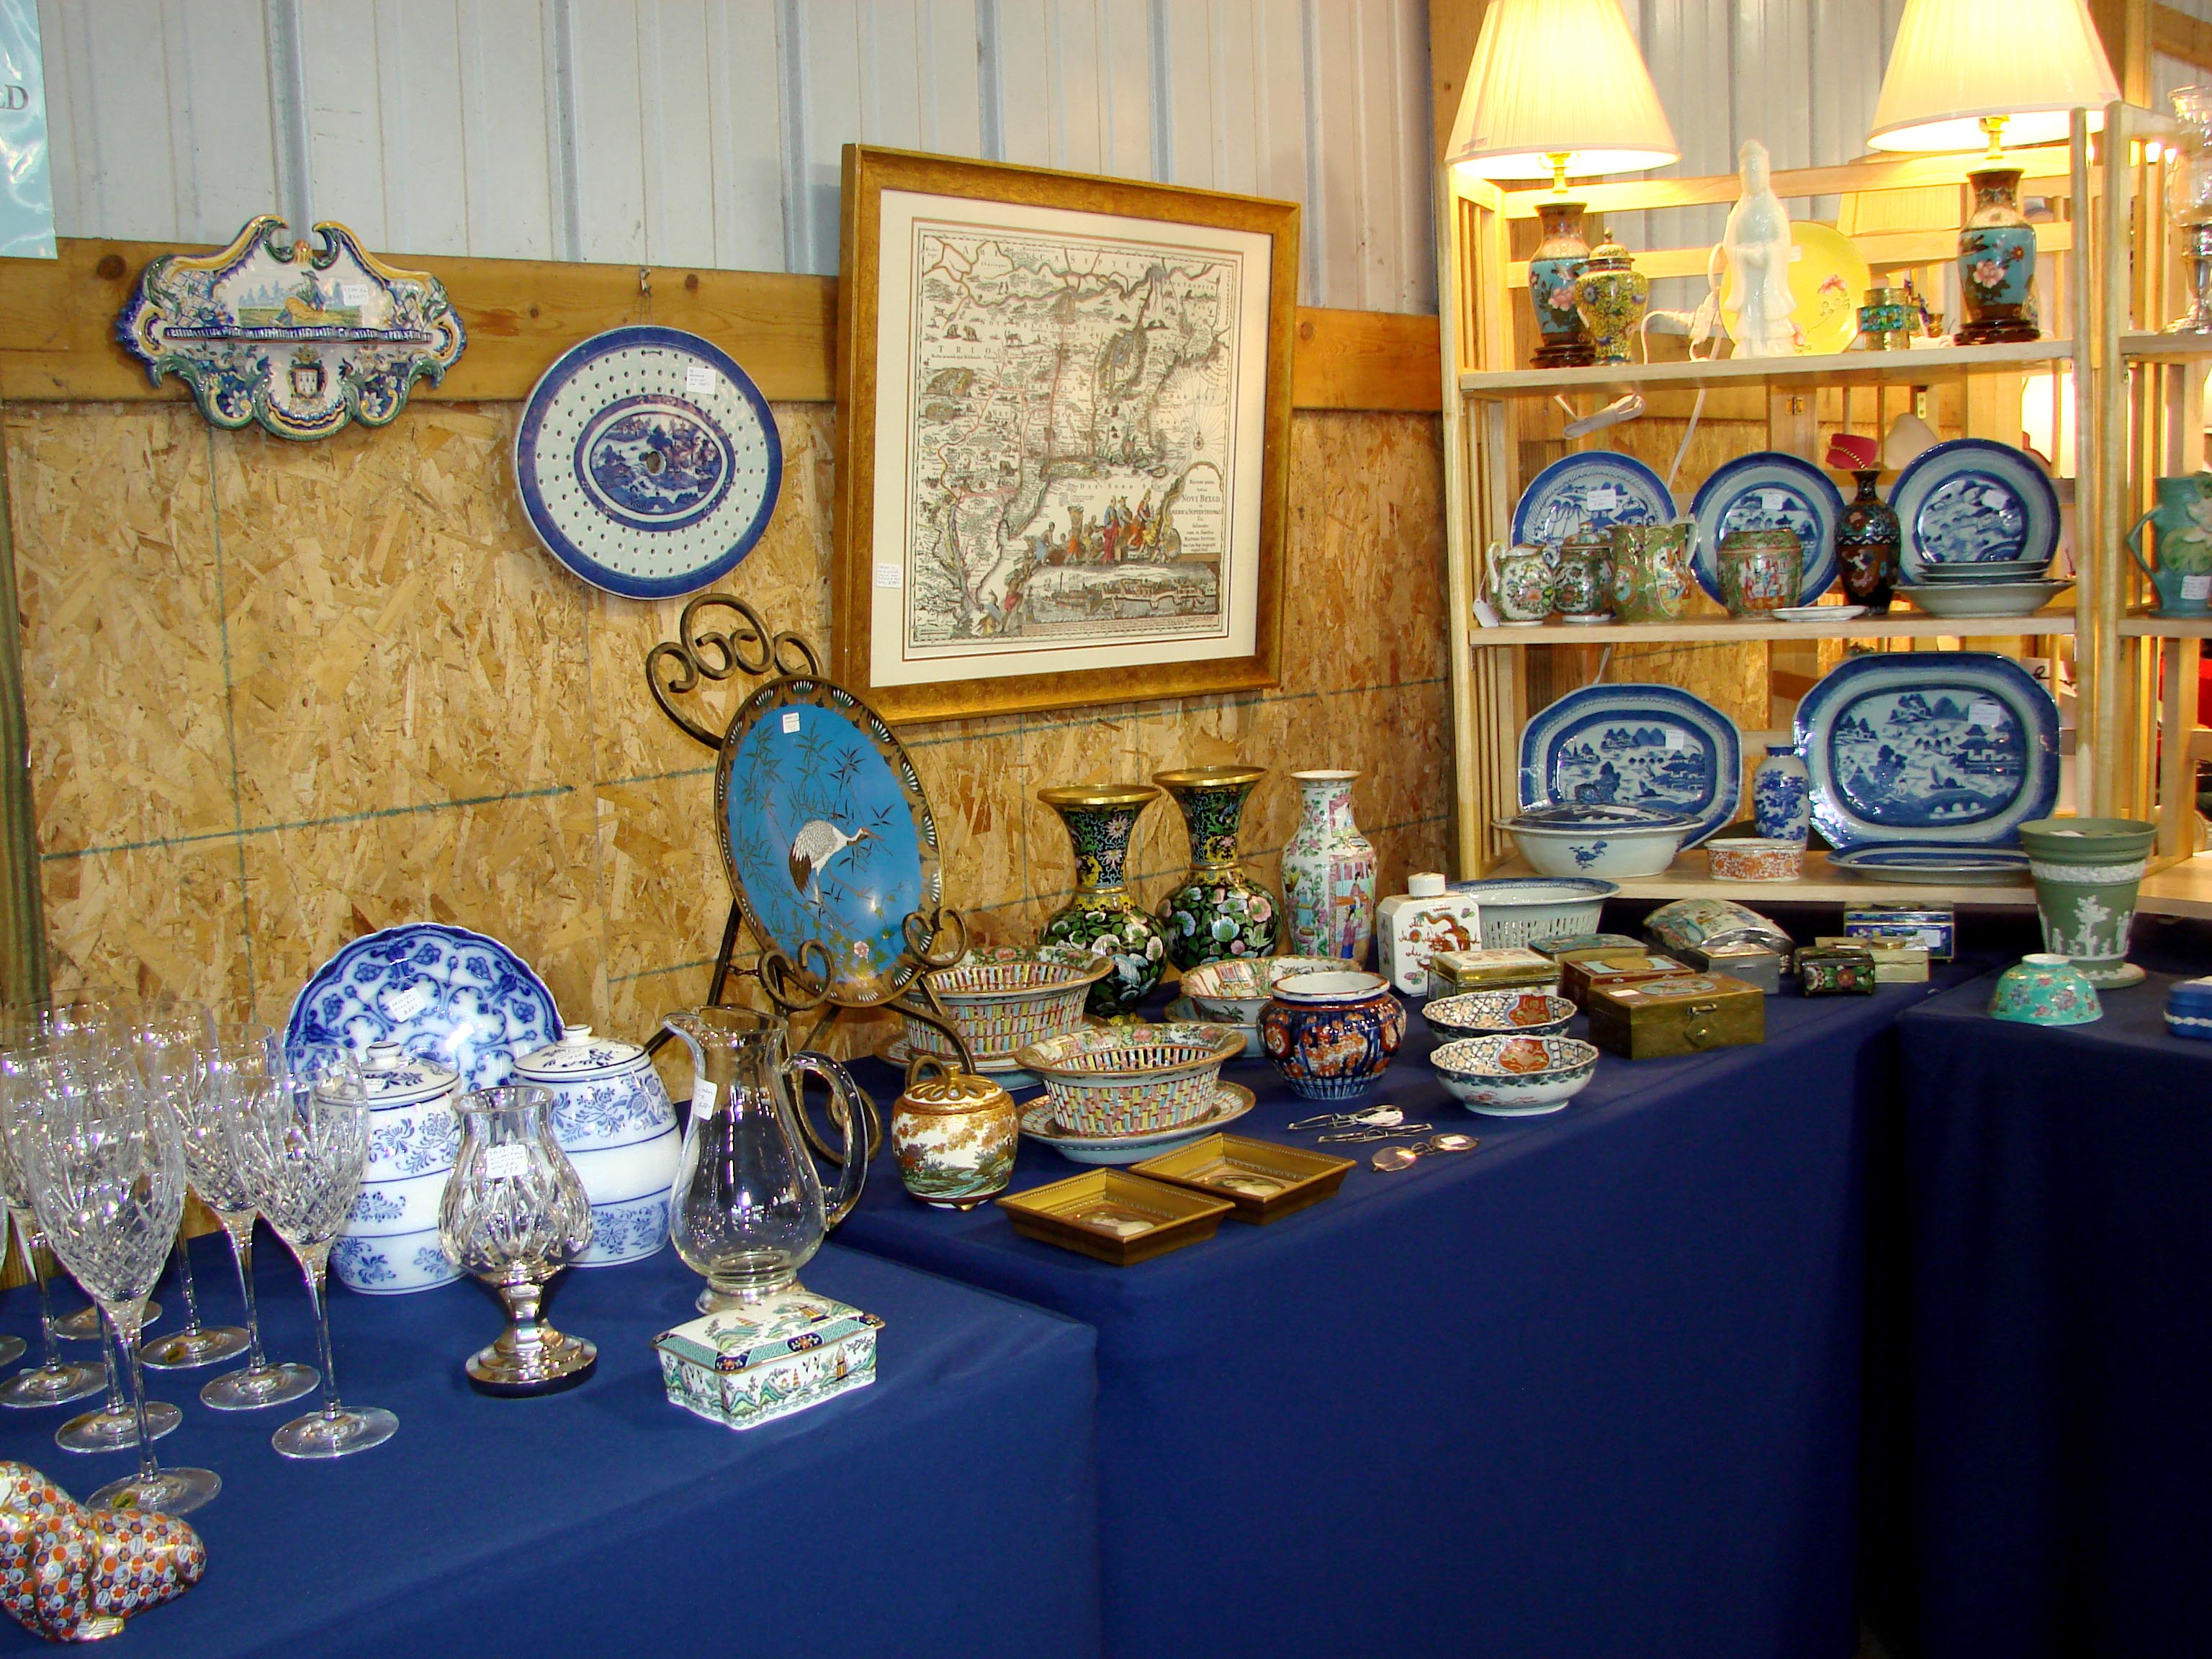 East Chesterfield Antiques, Sudbury, Mass., brought a selection of blue Canton porcelain and other Asian items.